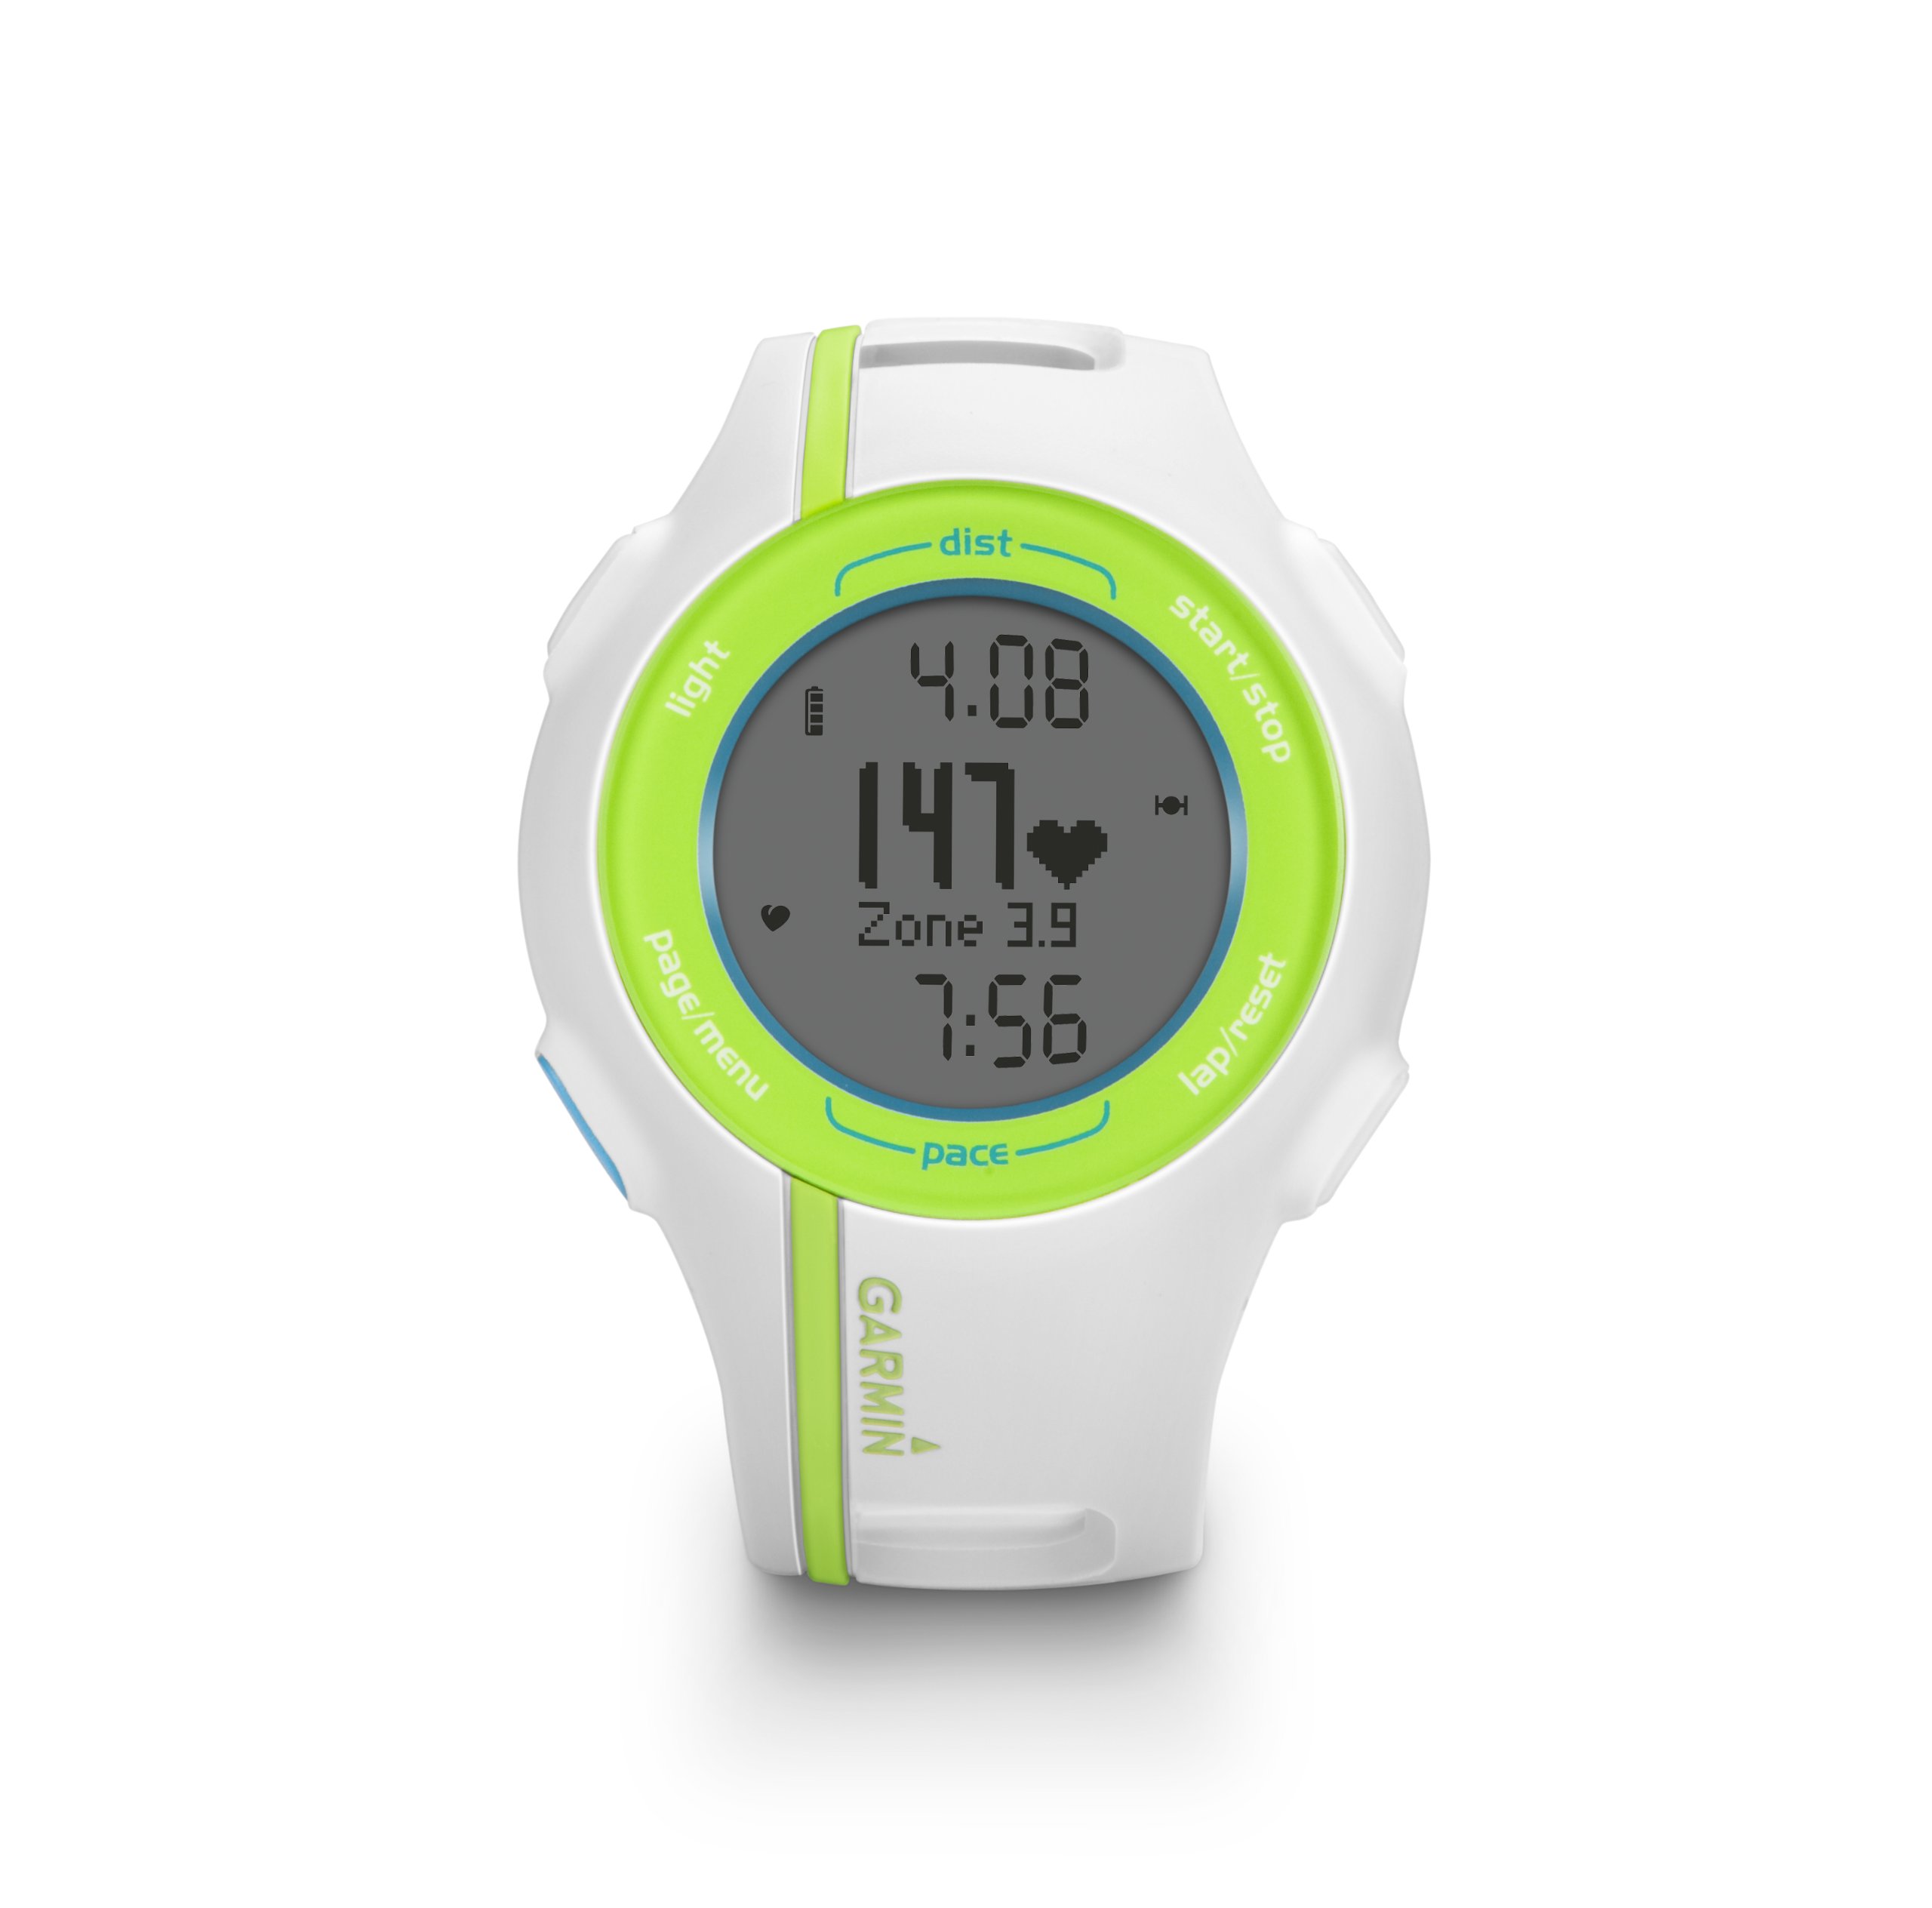 Forerunner® 210, Pacific, With Heart Rate Monitor and Foot Pod (Club Version)